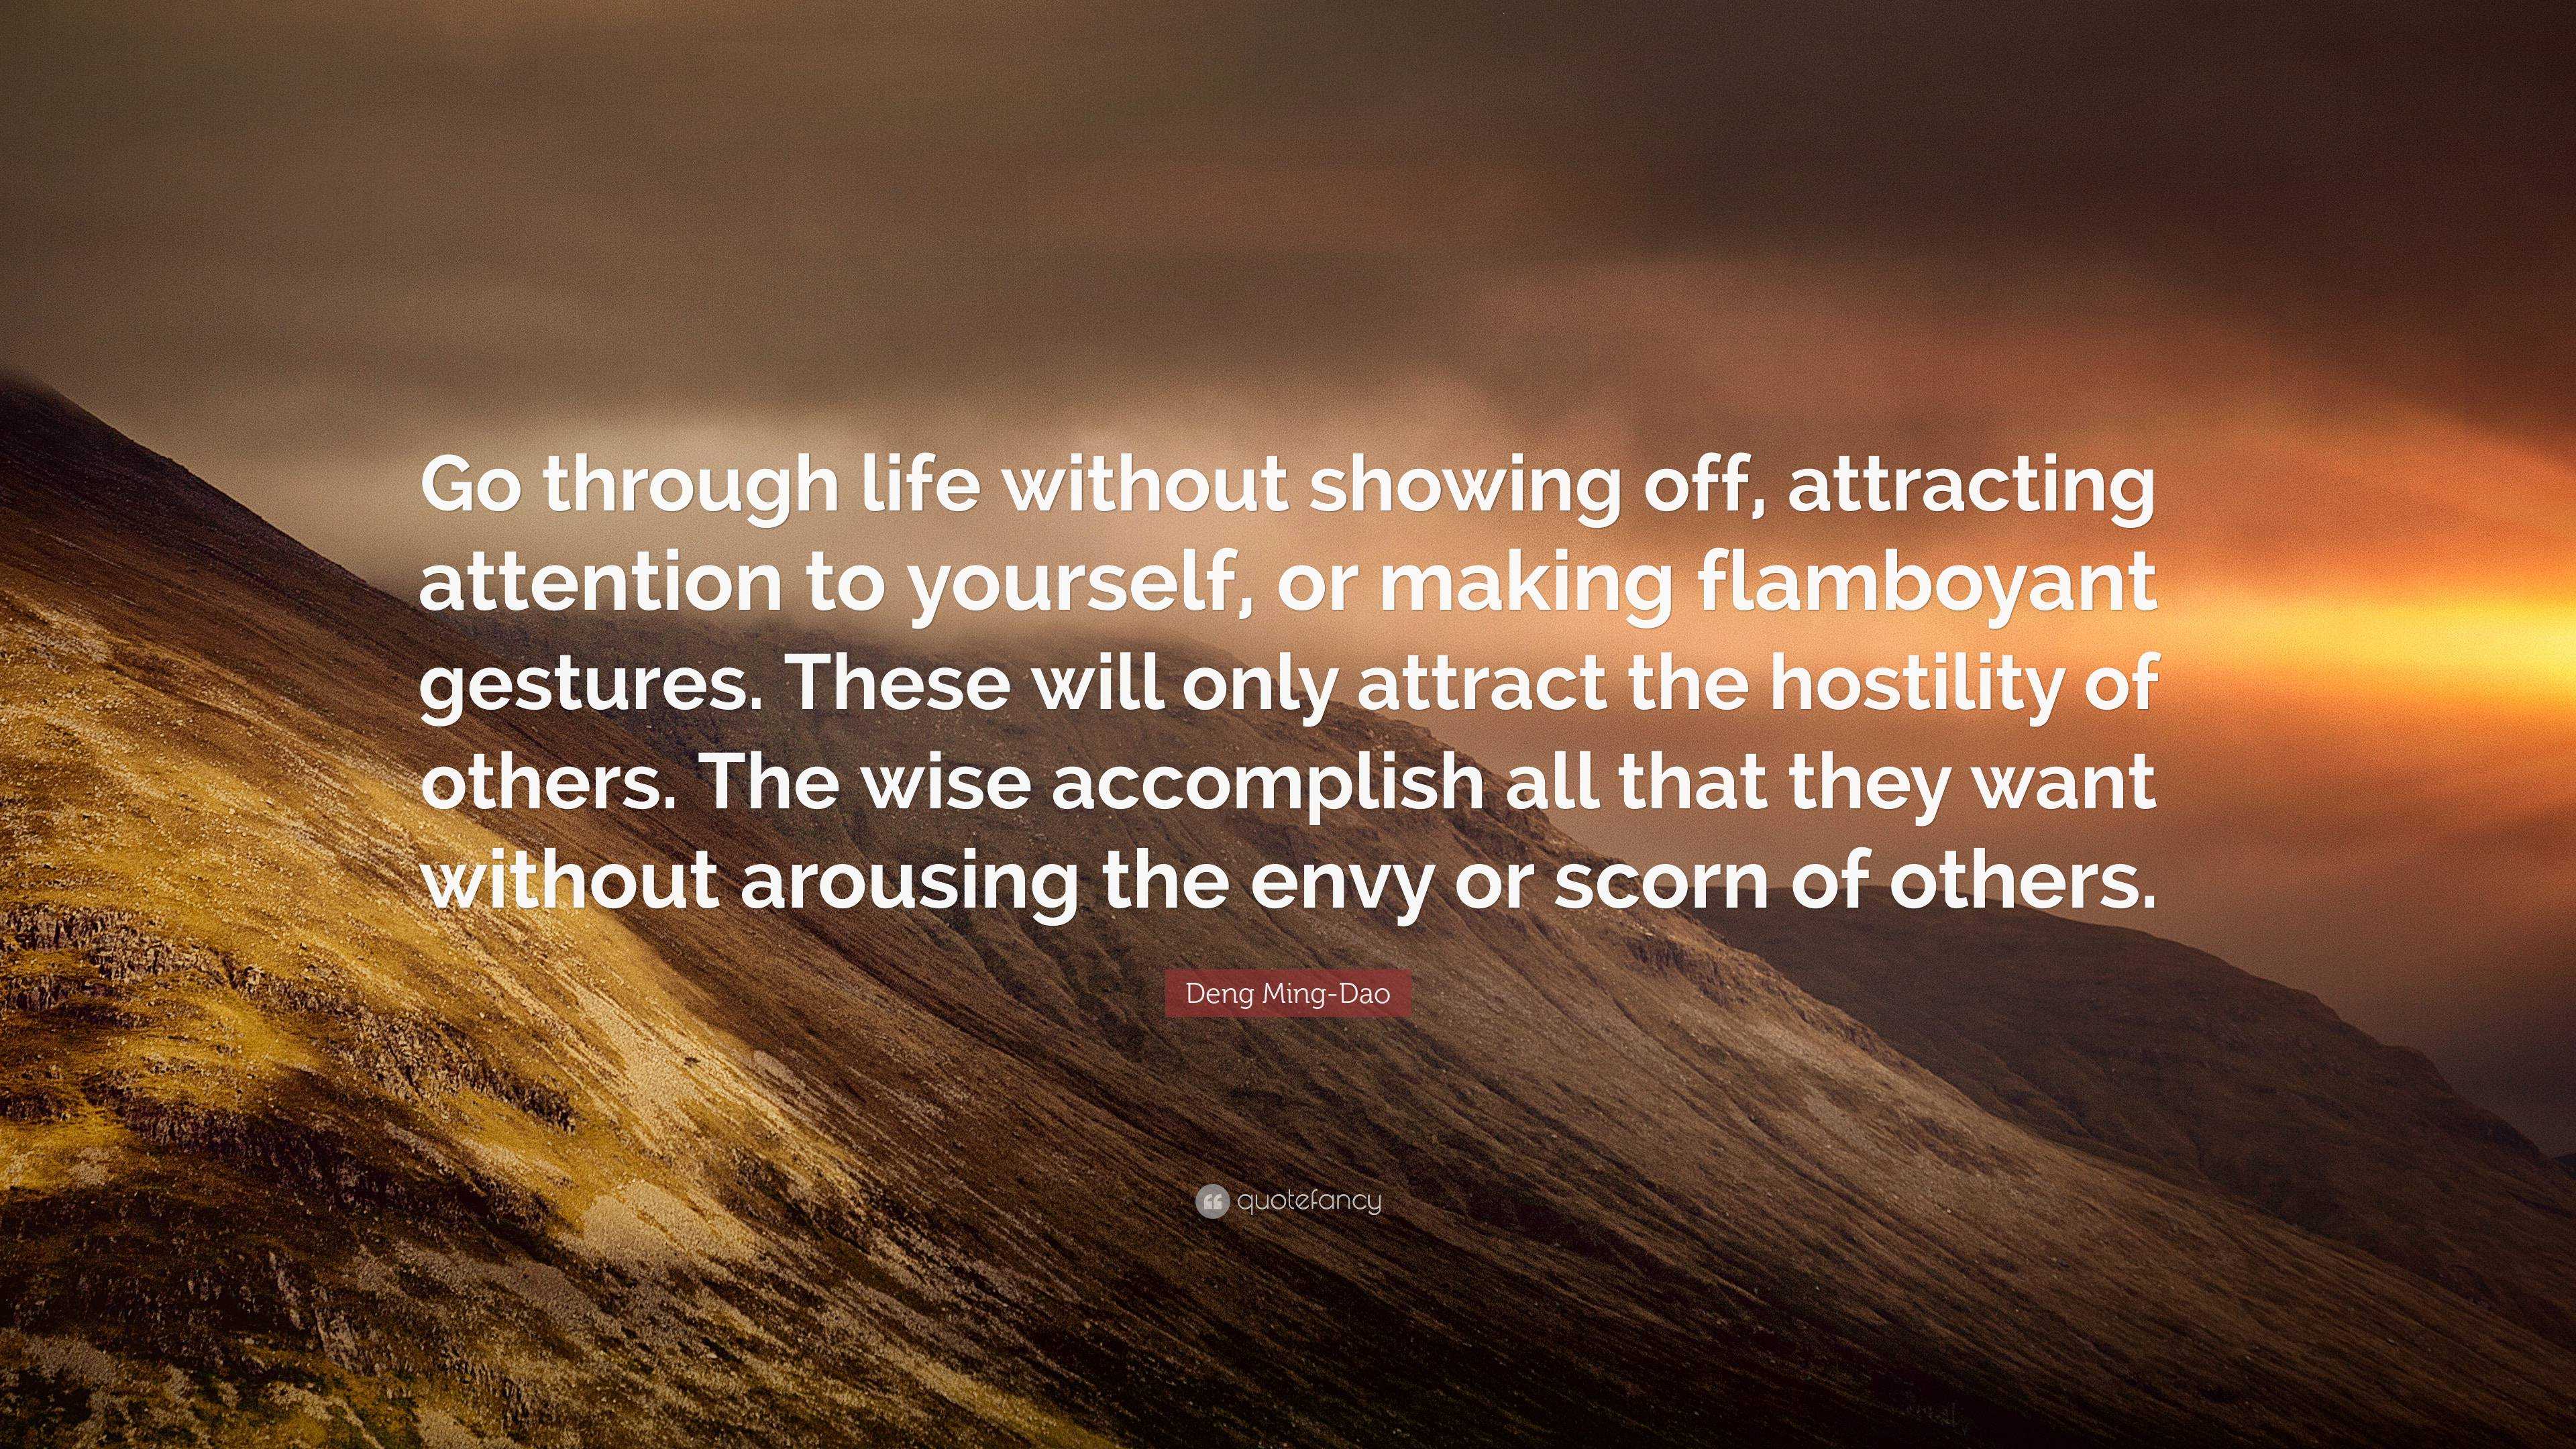 Deng Ming-Dao Quote: “Go through life without showing off, attracting ...